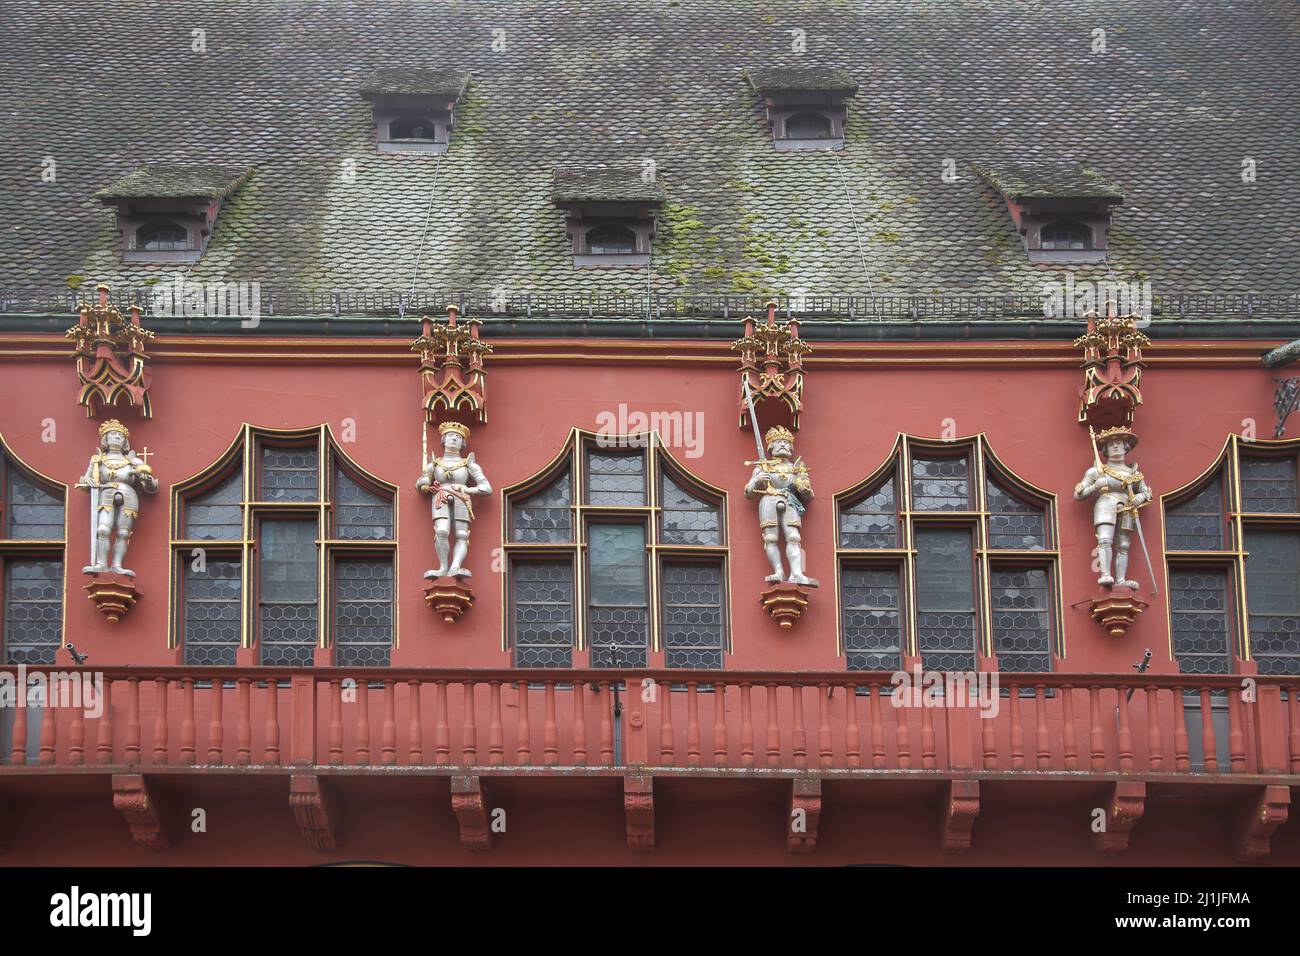 Balcony with figures at the historic department store in Freiburg, Baden-Württemberg, Germany Stock Photo